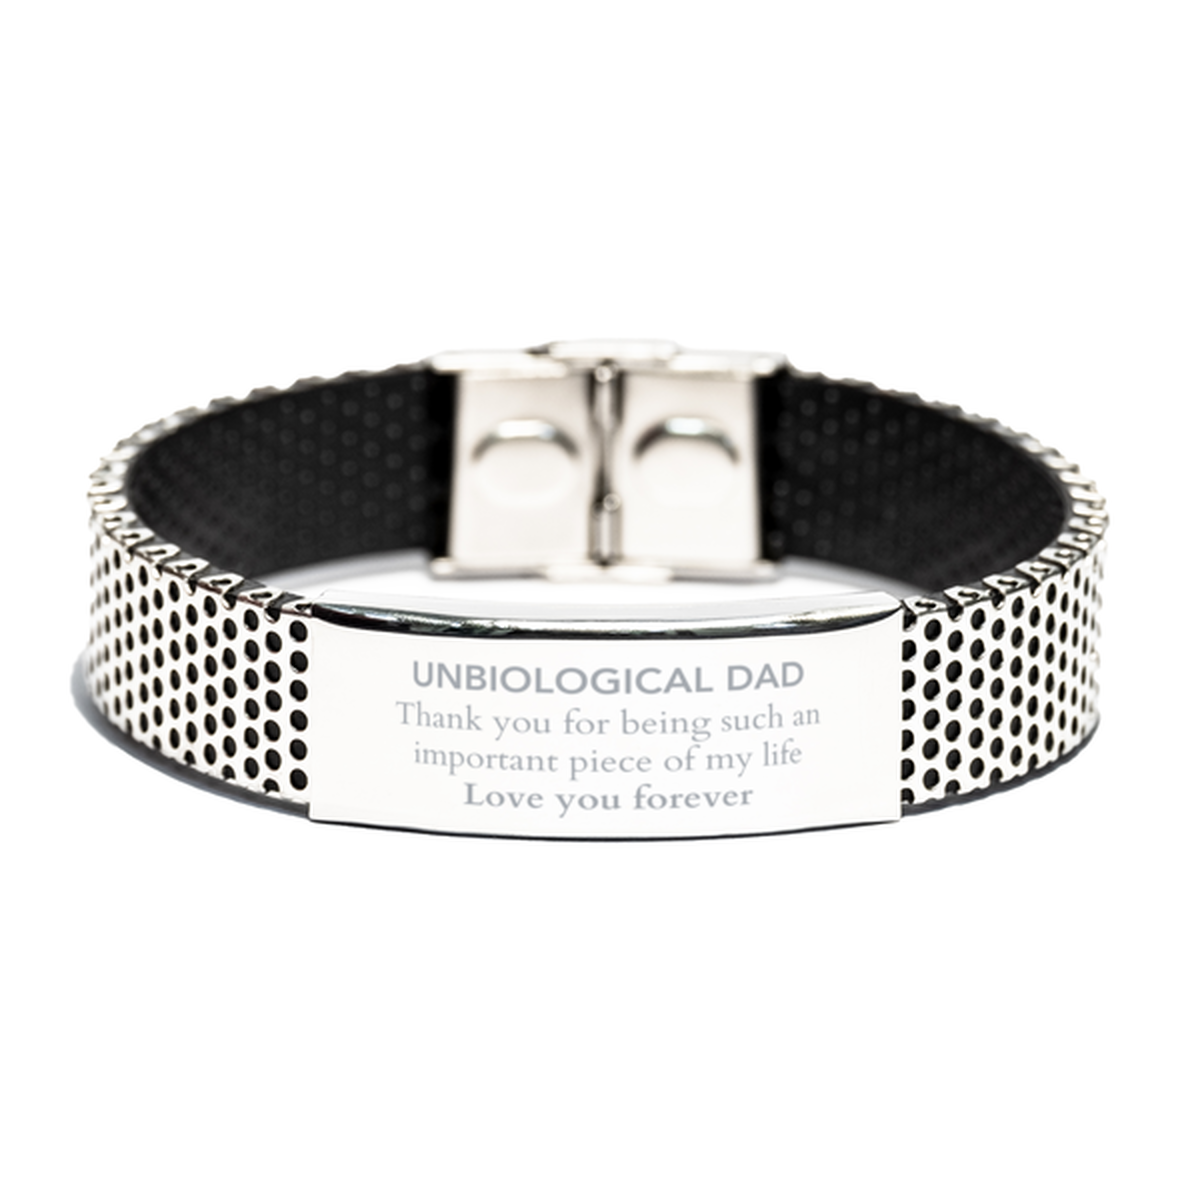 Appropriate Unbiological Dad Stainless Steel Bracelet Epic Birthday Gifts for Unbiological Dad Thank you for being such an important piece of my life Unbiological Dad Christmas Mothers Fathers Day